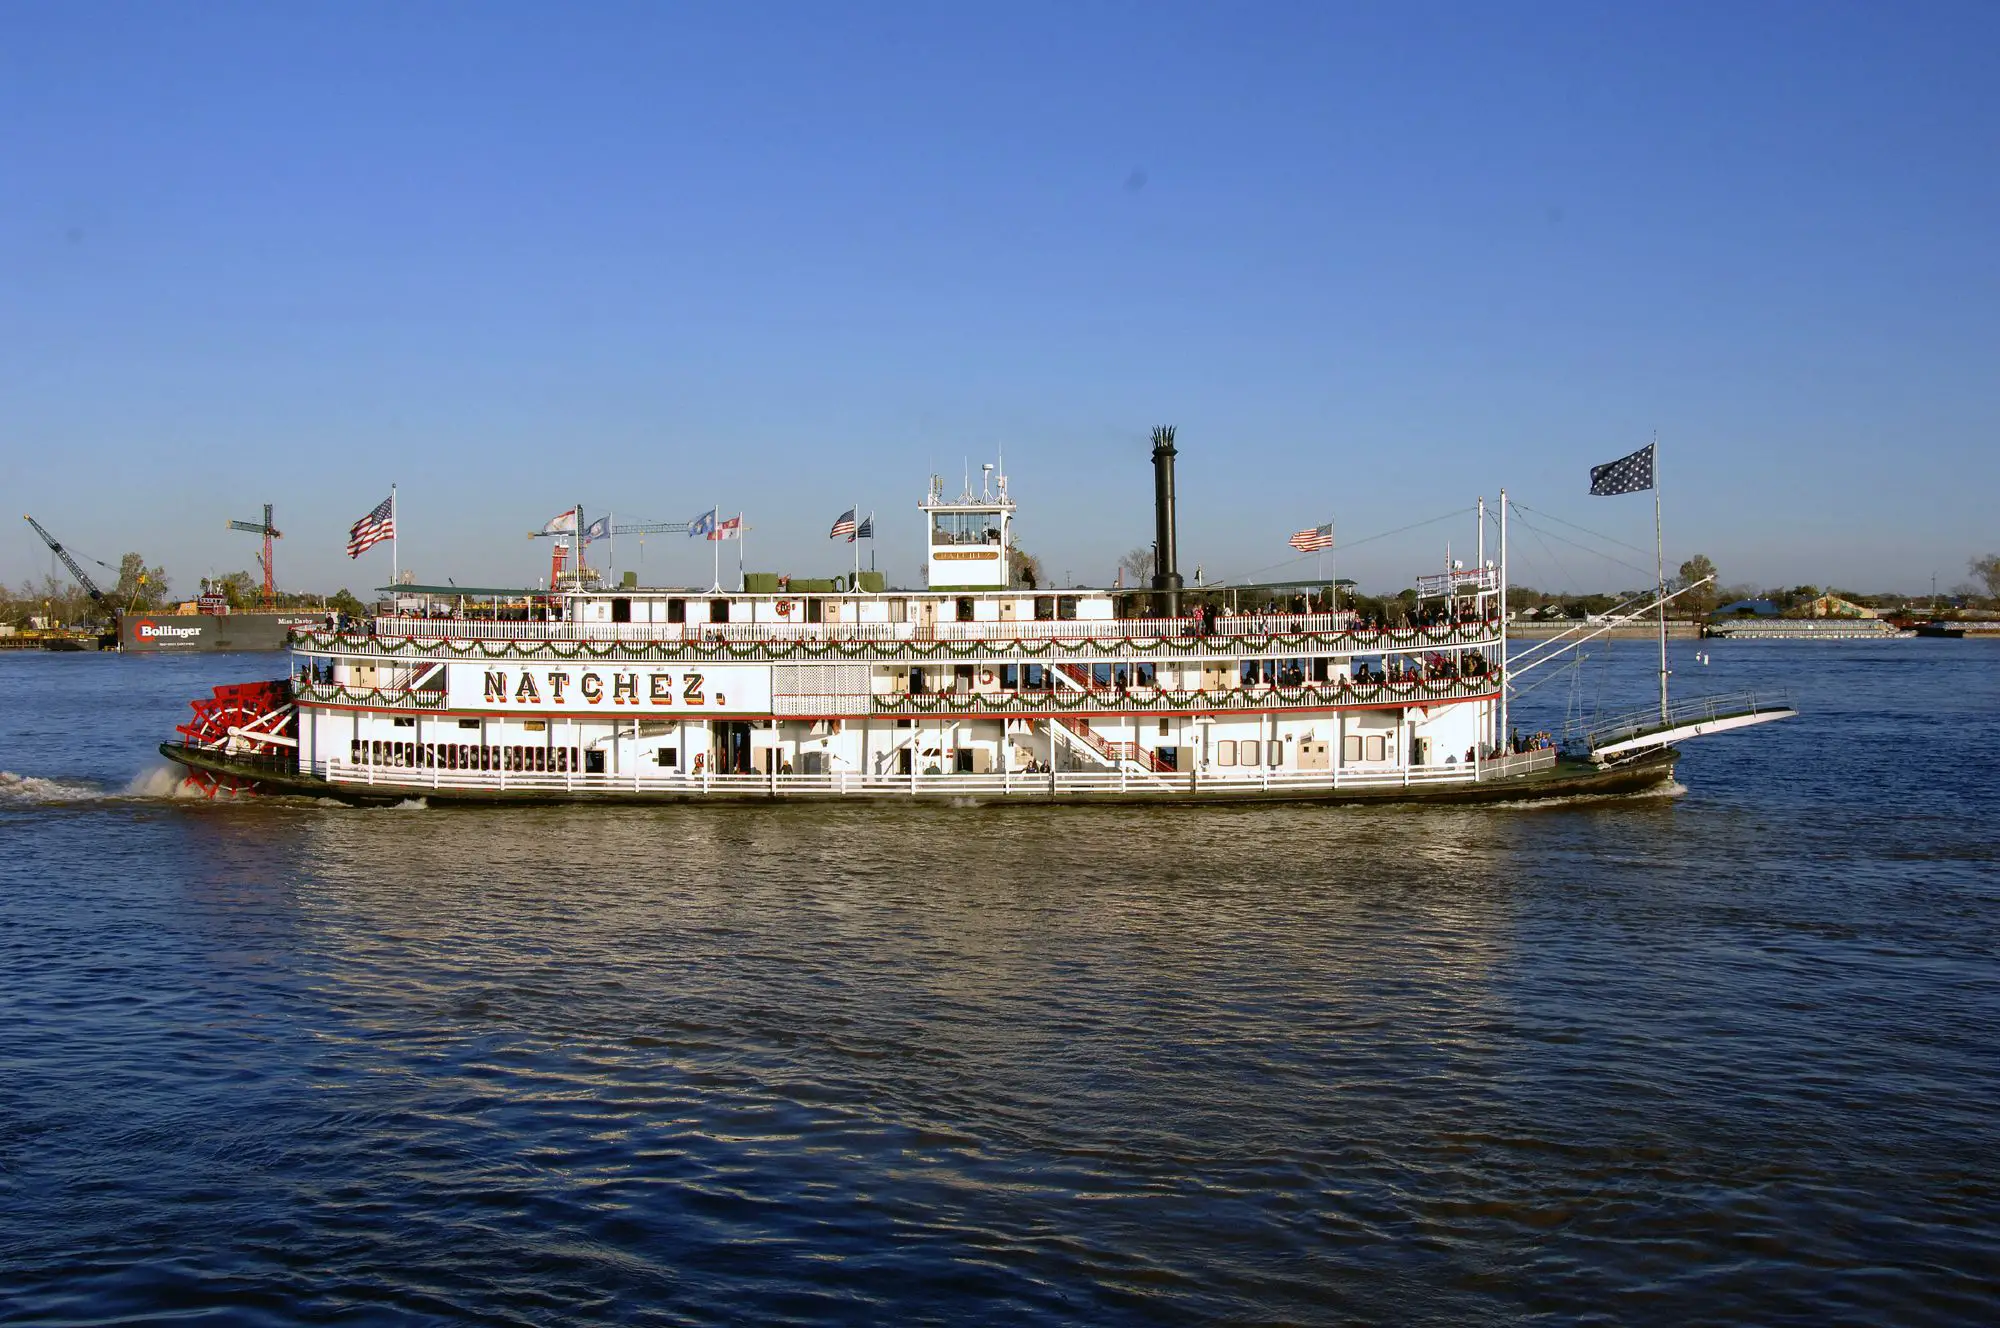 River Boats: River Boats On The Mississippi